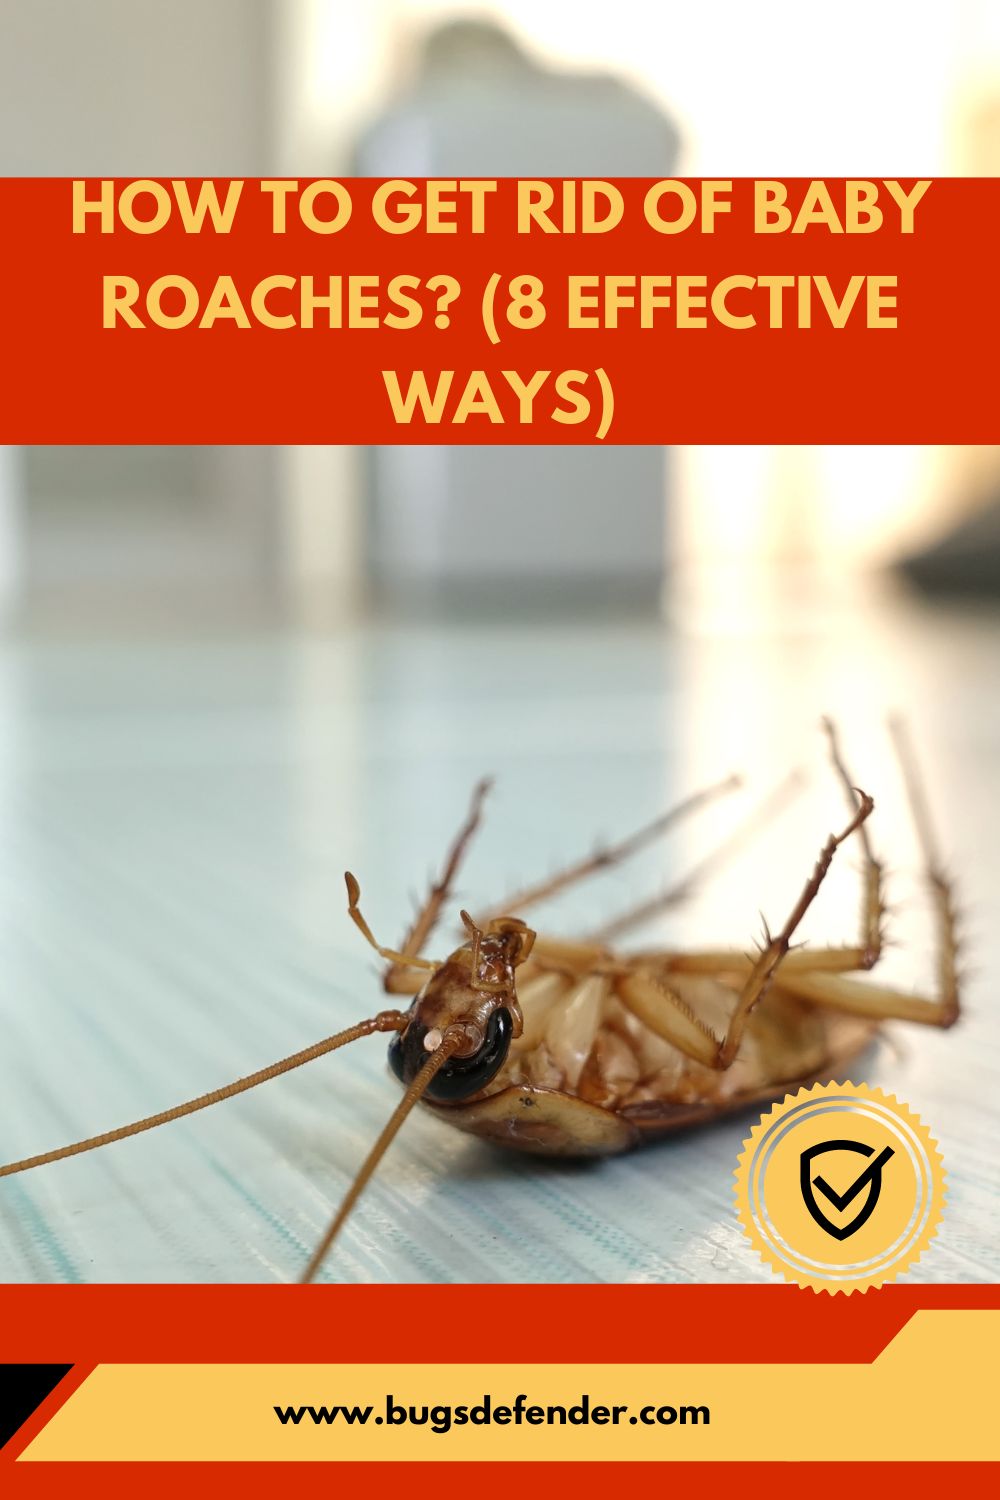 How To Get Rid Of Baby Roaches? (8 Effective Ways) pin 2